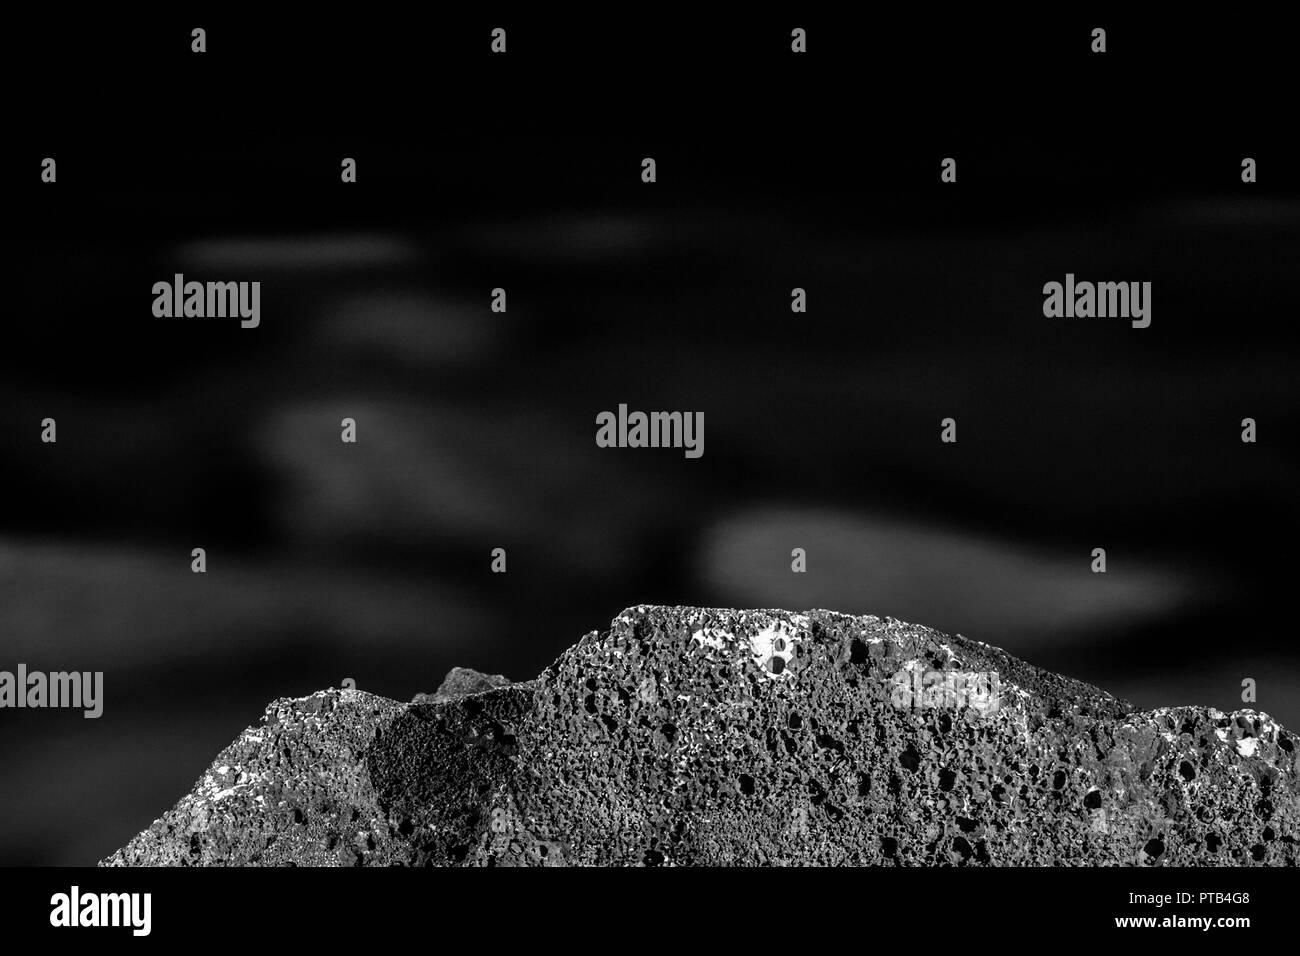 Black and white, monochrome, abstract, night composition of stones. Moonscape. Blackness and atmosphere of calmness in rocky landscape. Stock Photo